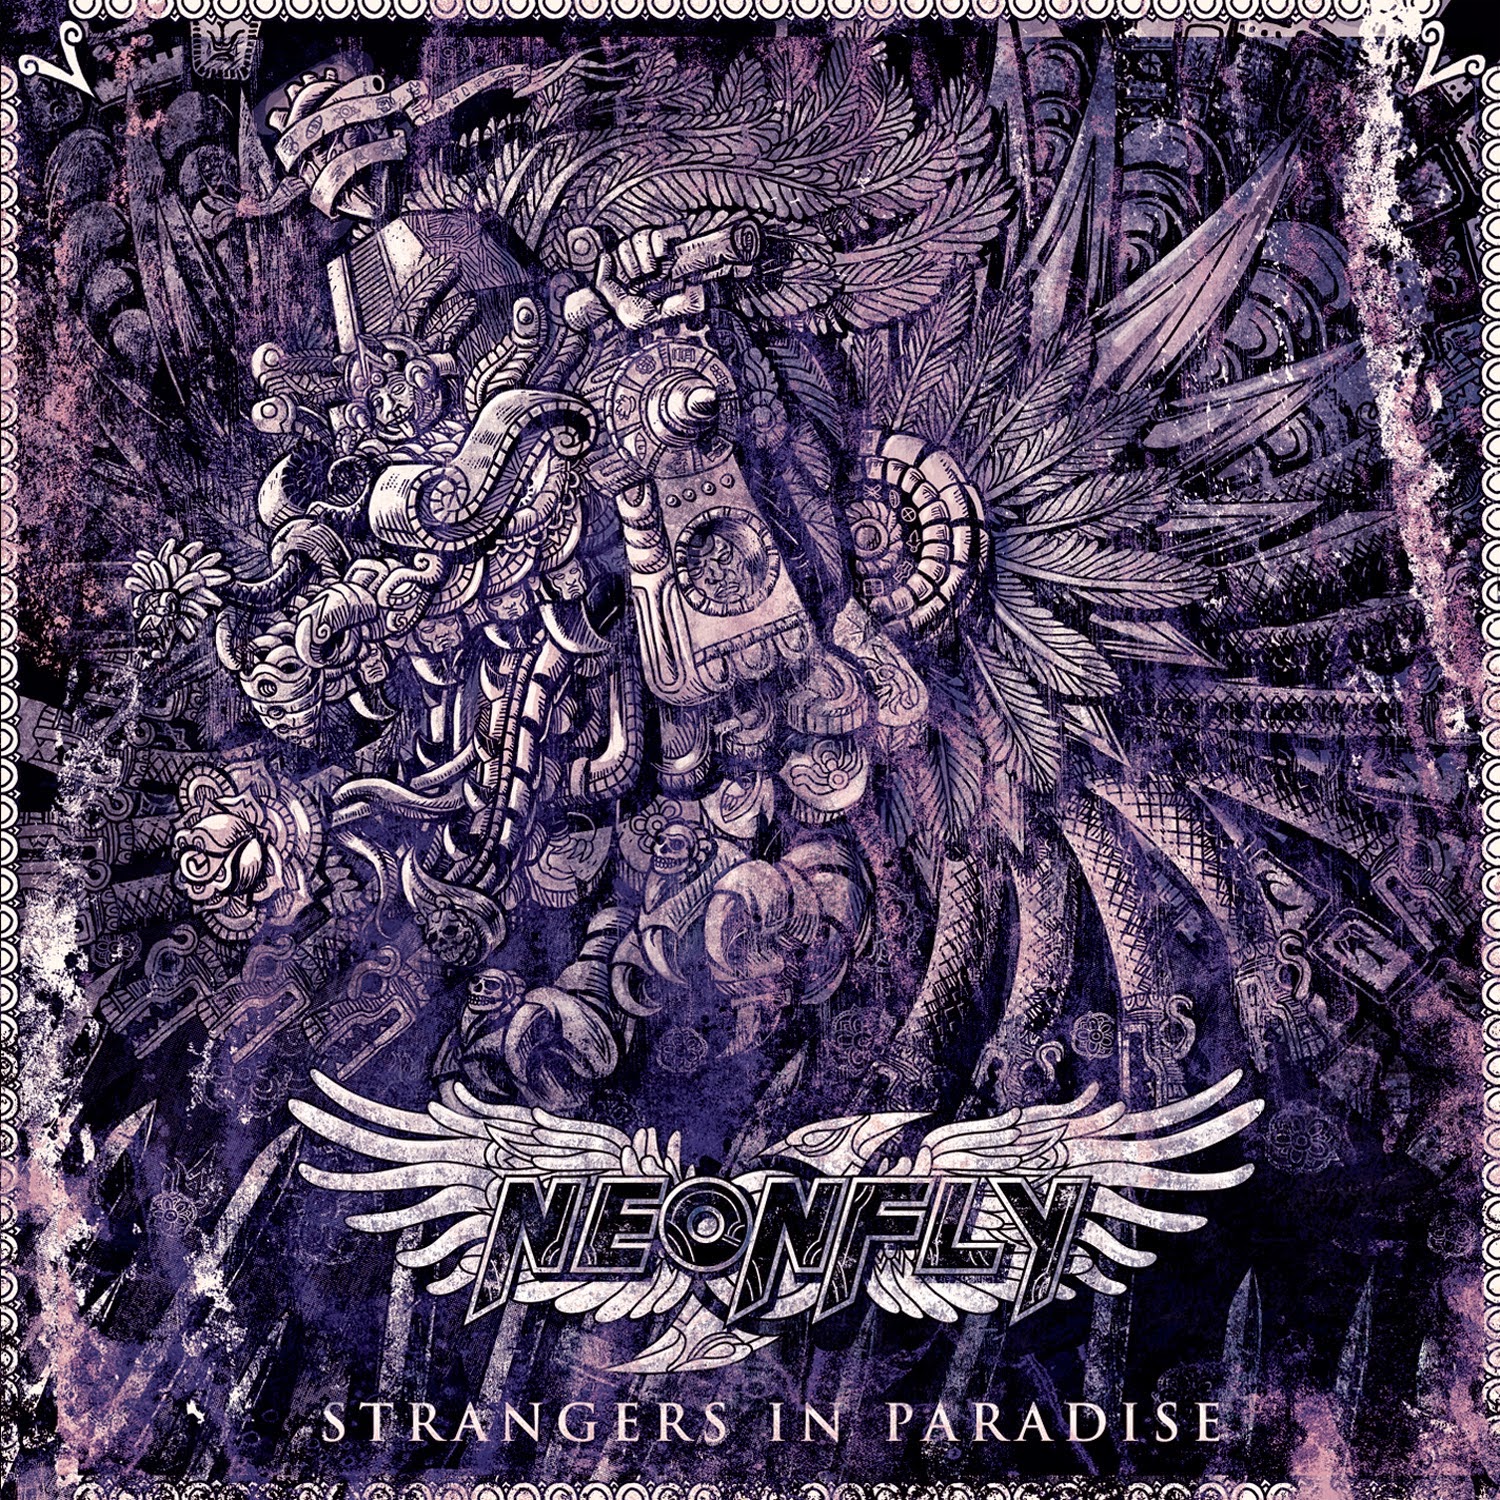 http://rock-and-metal-4-you.blogspot.de/2014/11/cd-review-neonfly-strangers-in-paradise.html